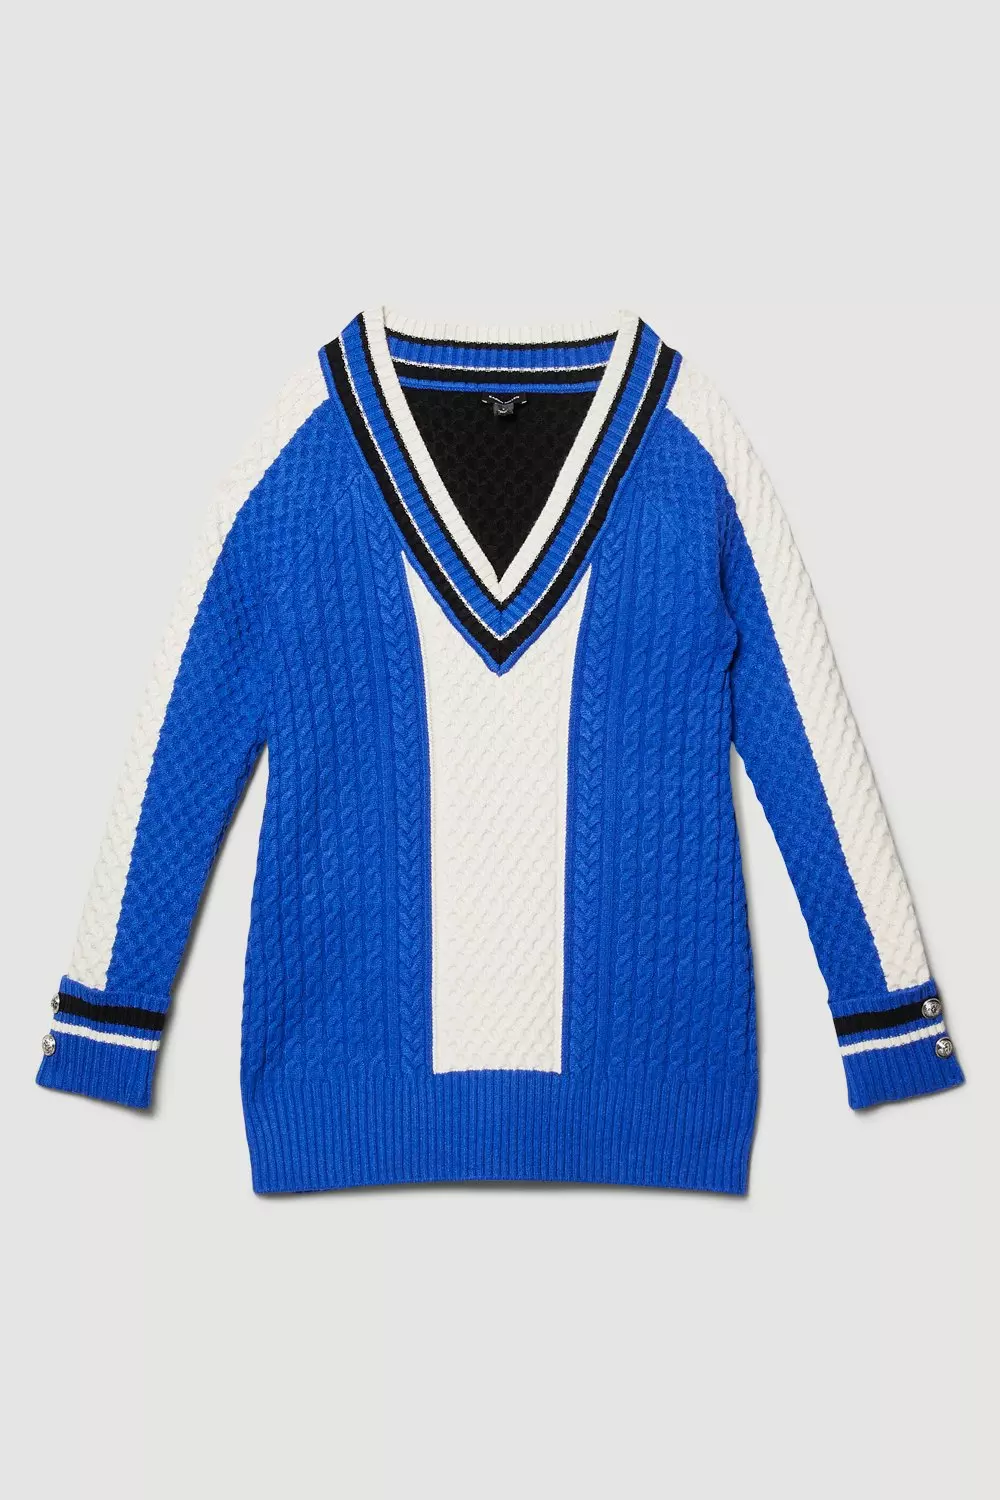 Crew Neck Chunky Cable Knit Pullover Sweater in Cobalt Blue